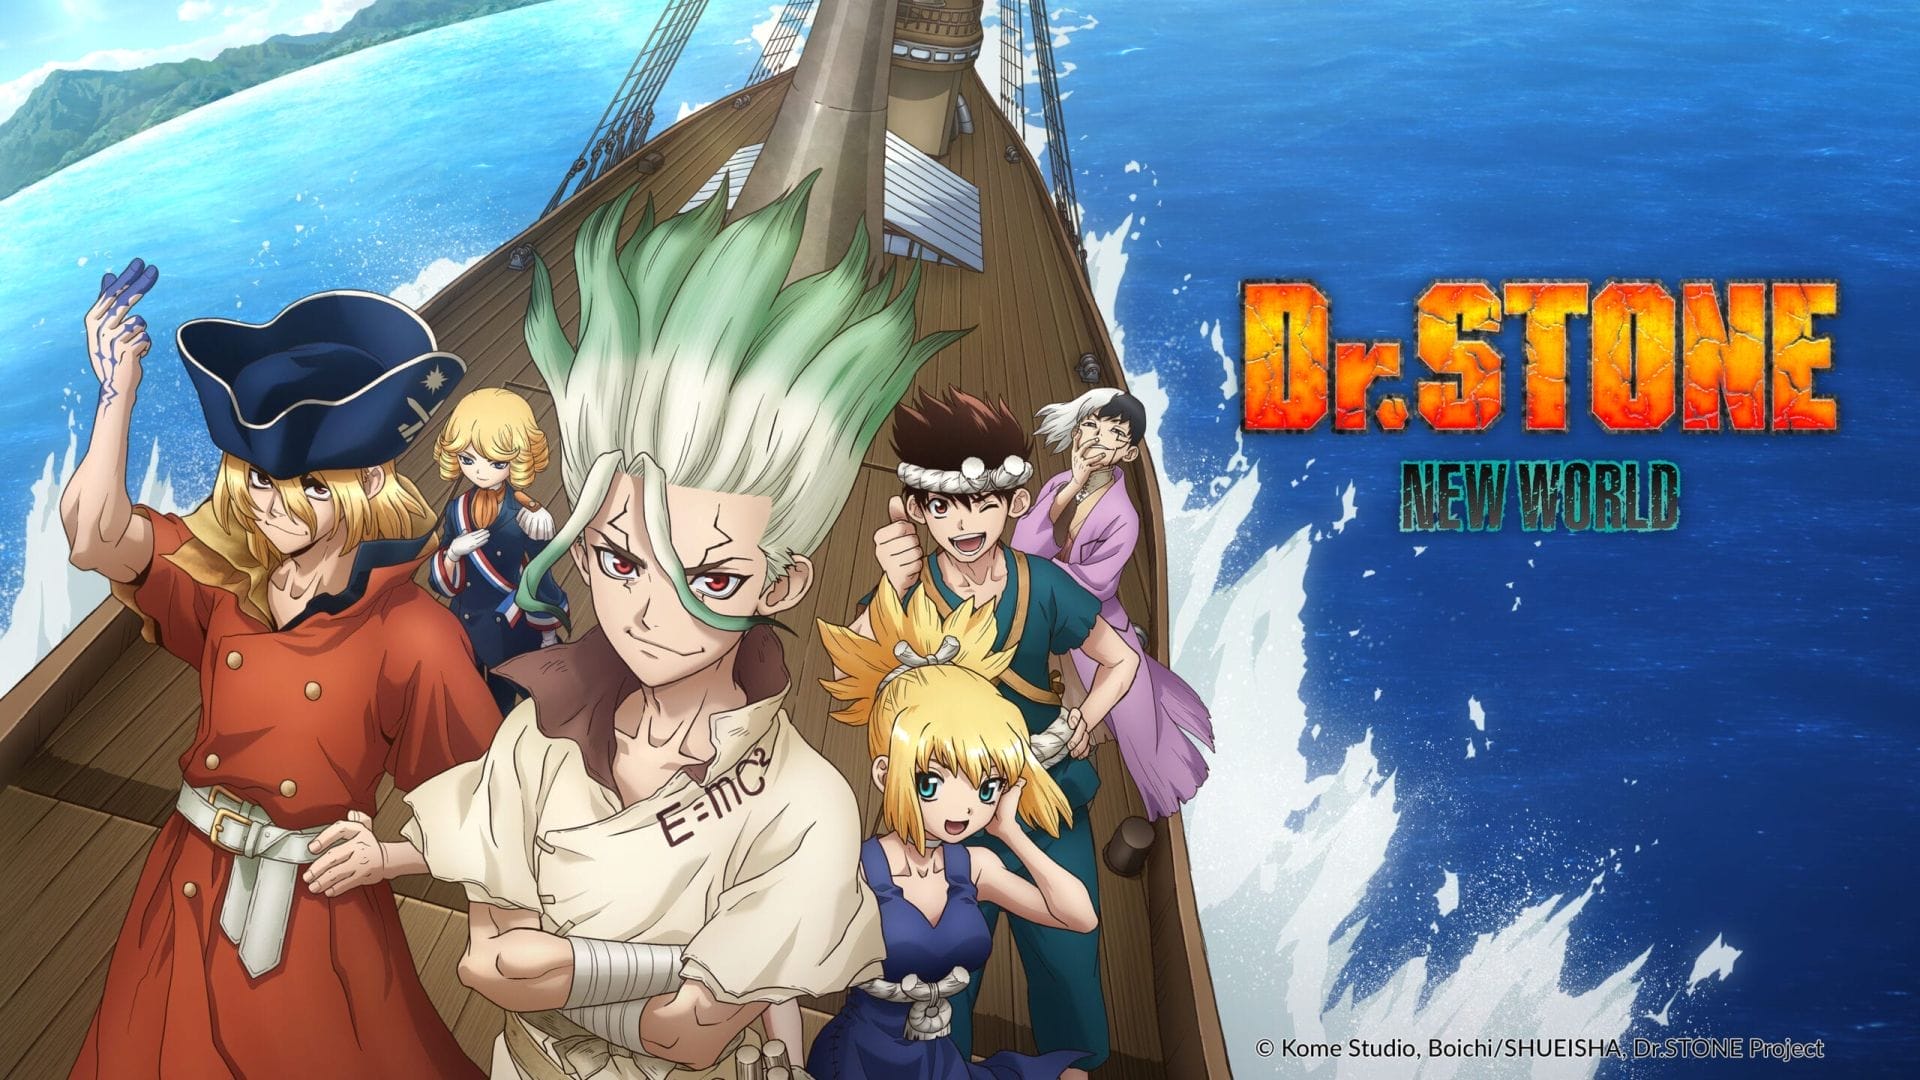 Key Visual for Dr. Stone The New World that depicts the main cast on a boat sailing across the vast blue ocean.